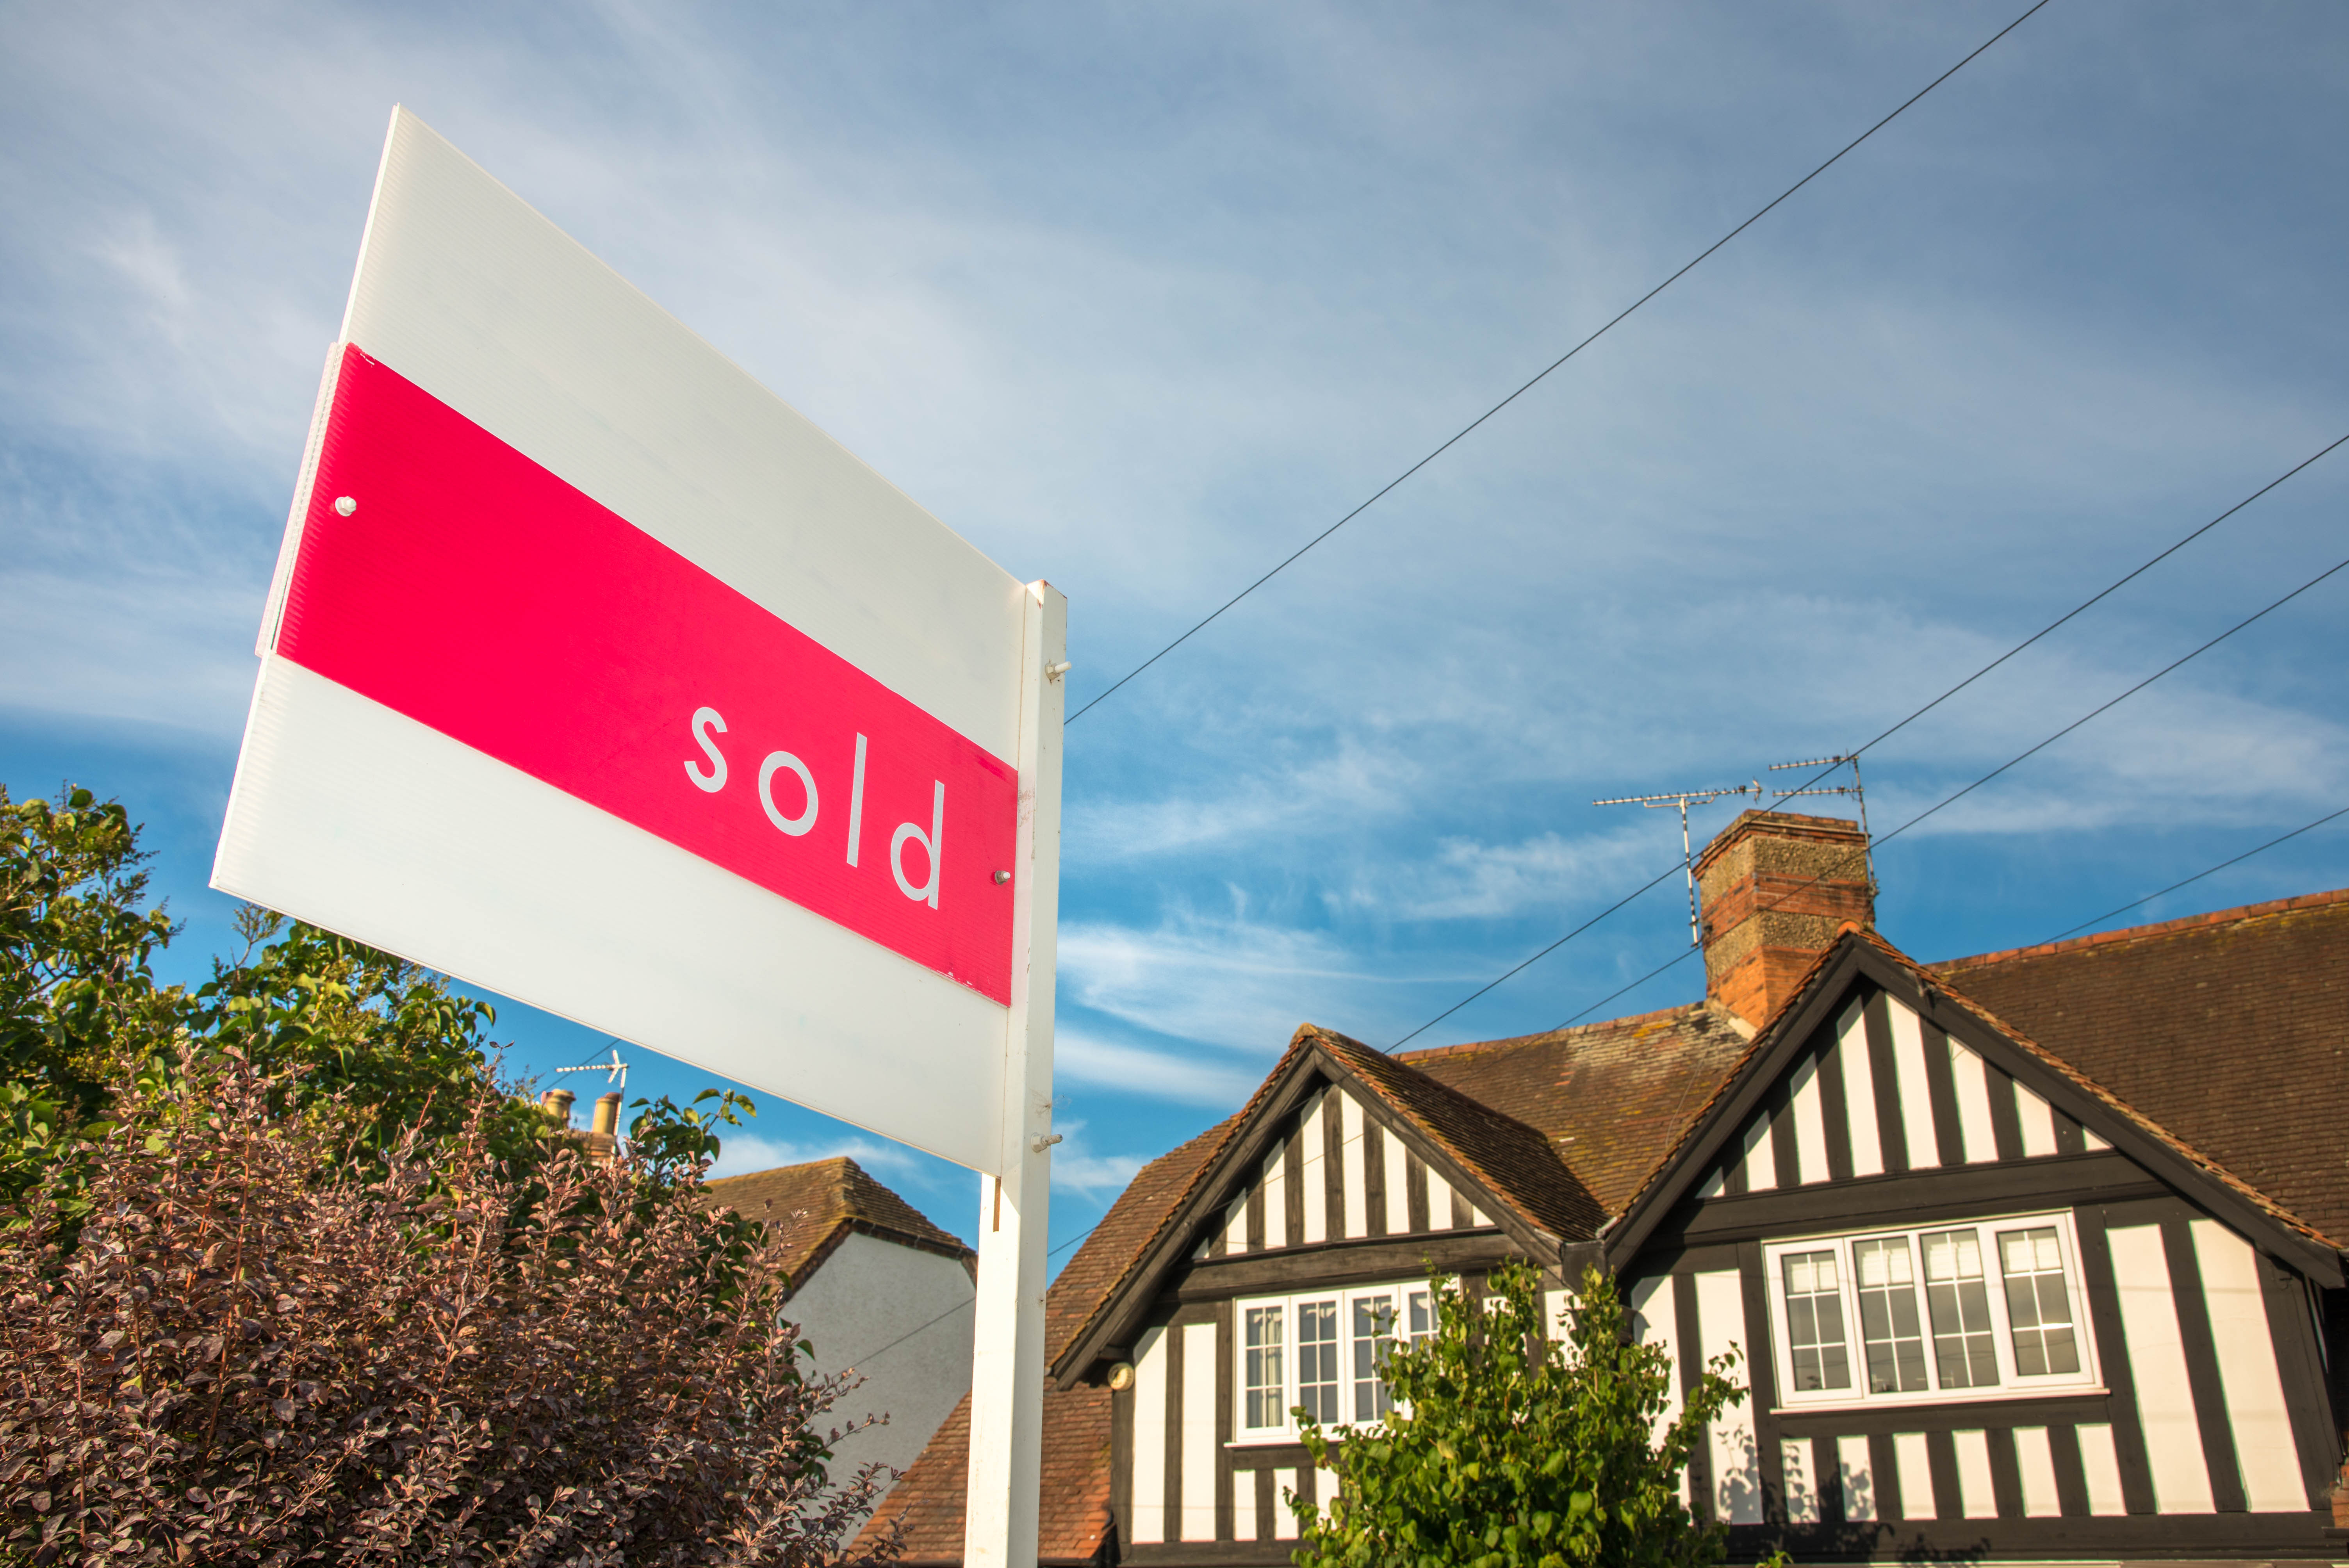 Stamp duty holiday sees 22% rise in monthly property transactions